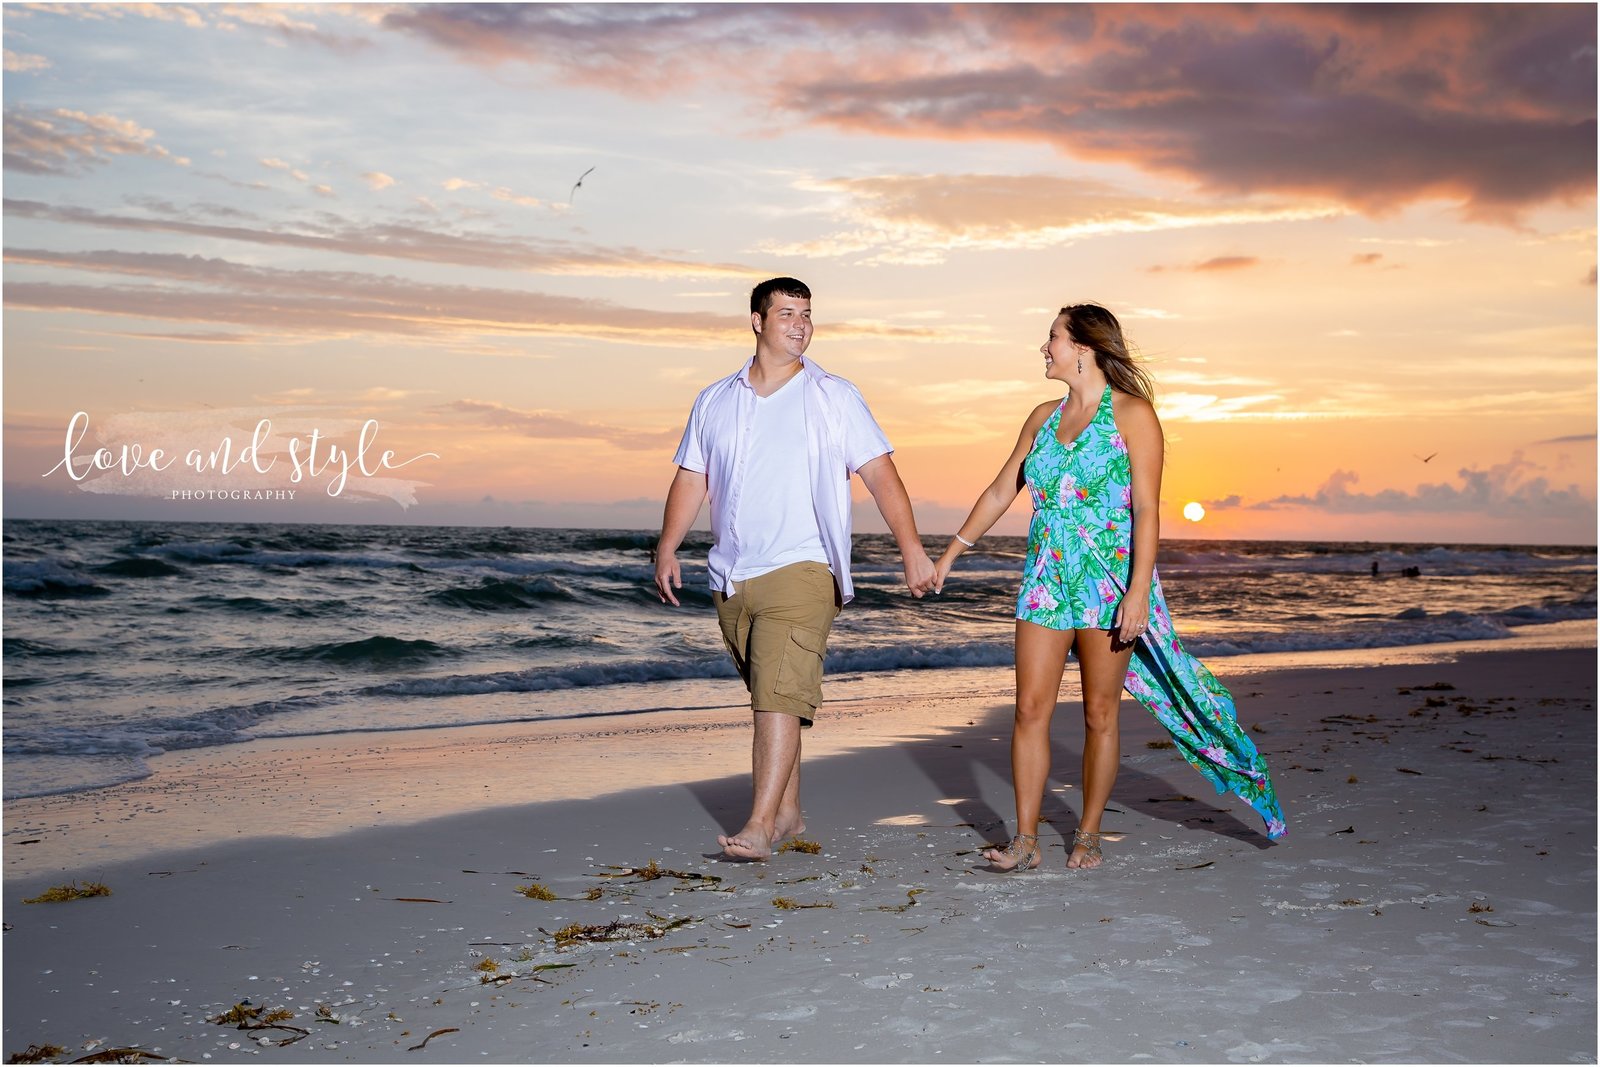 Engagement Photography on Bradenton Beach during sunset with couple holding hands and walking on the beach